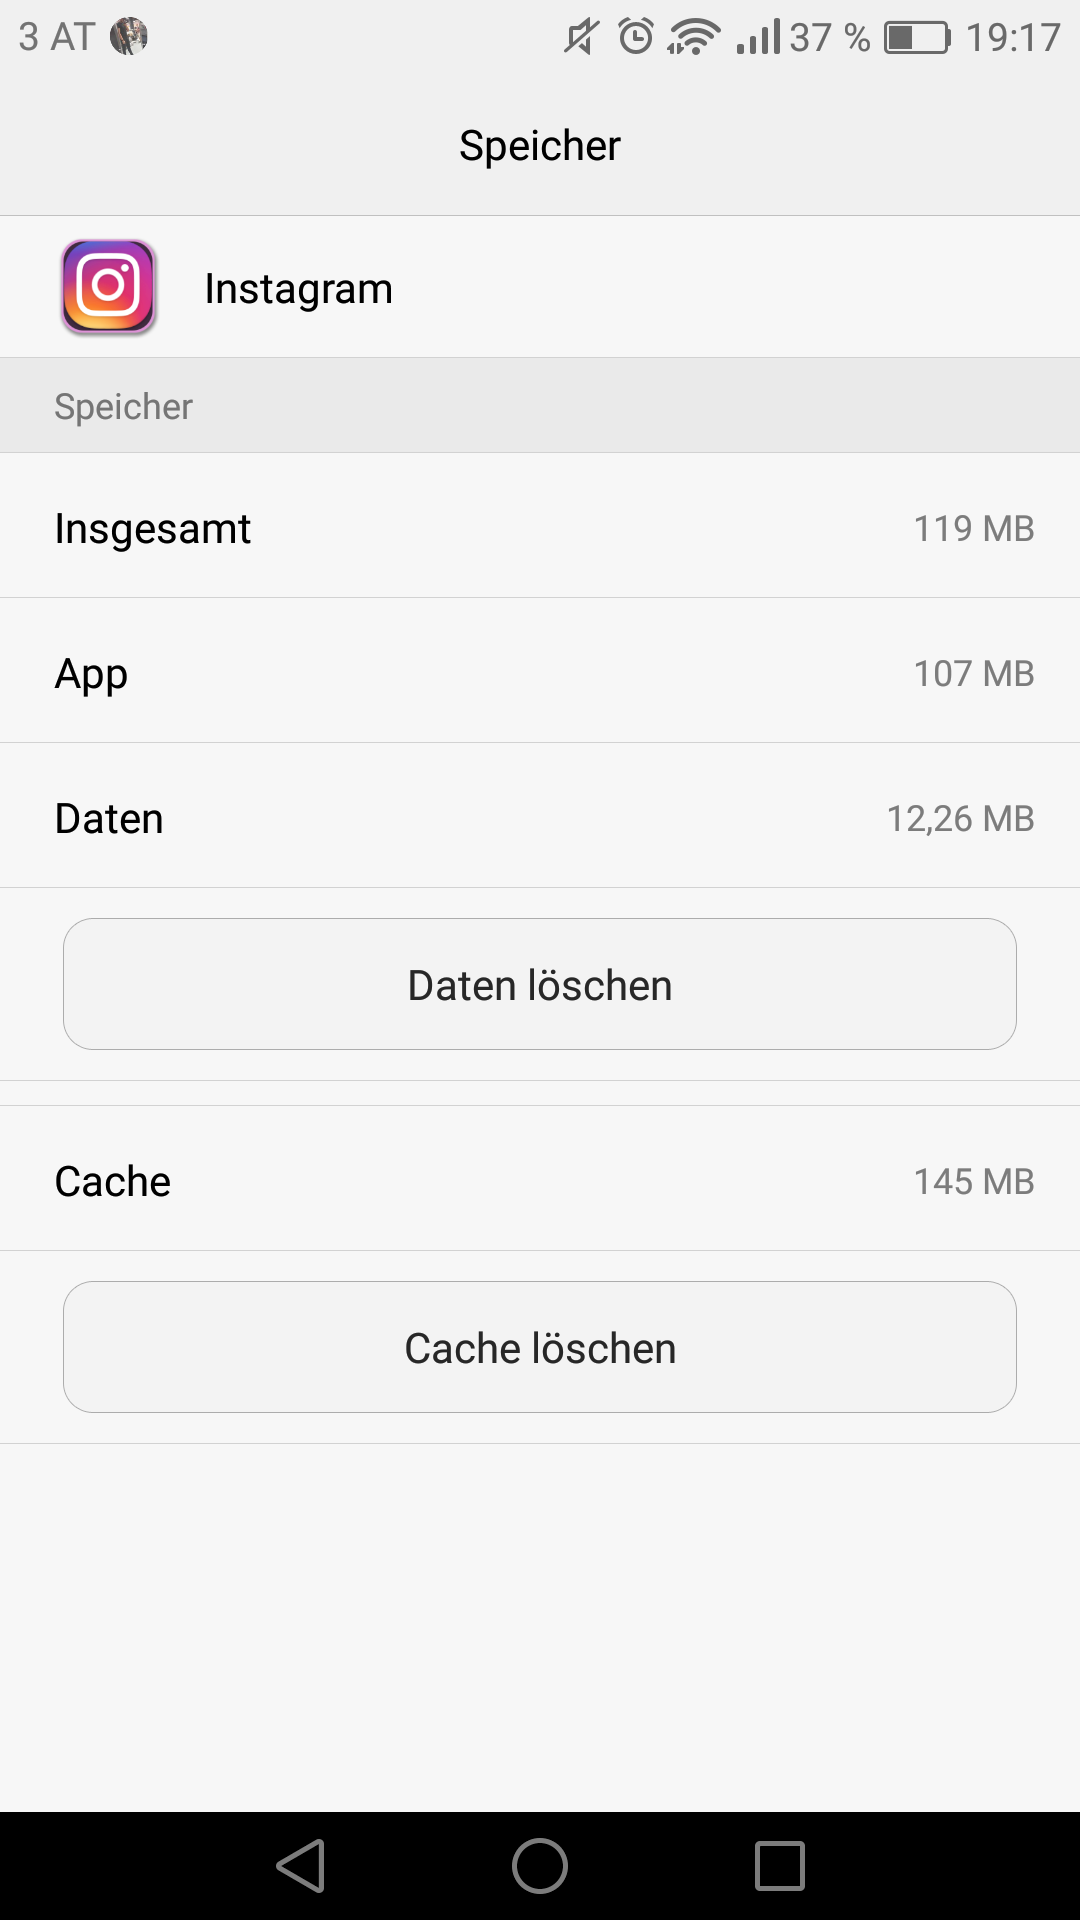 Transistor eeuw Rusland How to move to Huawei p9 lite apps on sd card? - HuaweiSpot